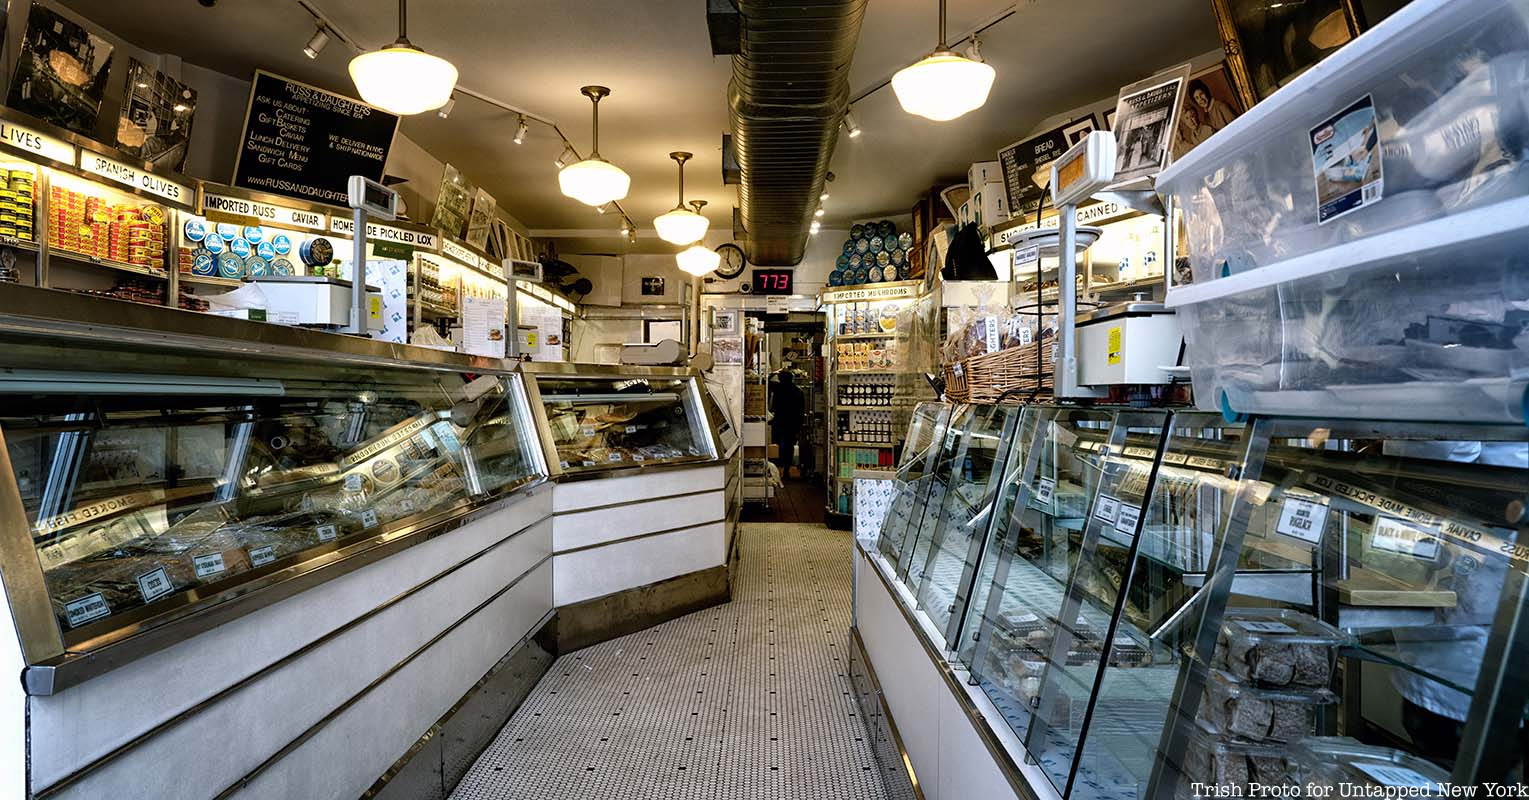 Russ & Daughters on the Lower East Side